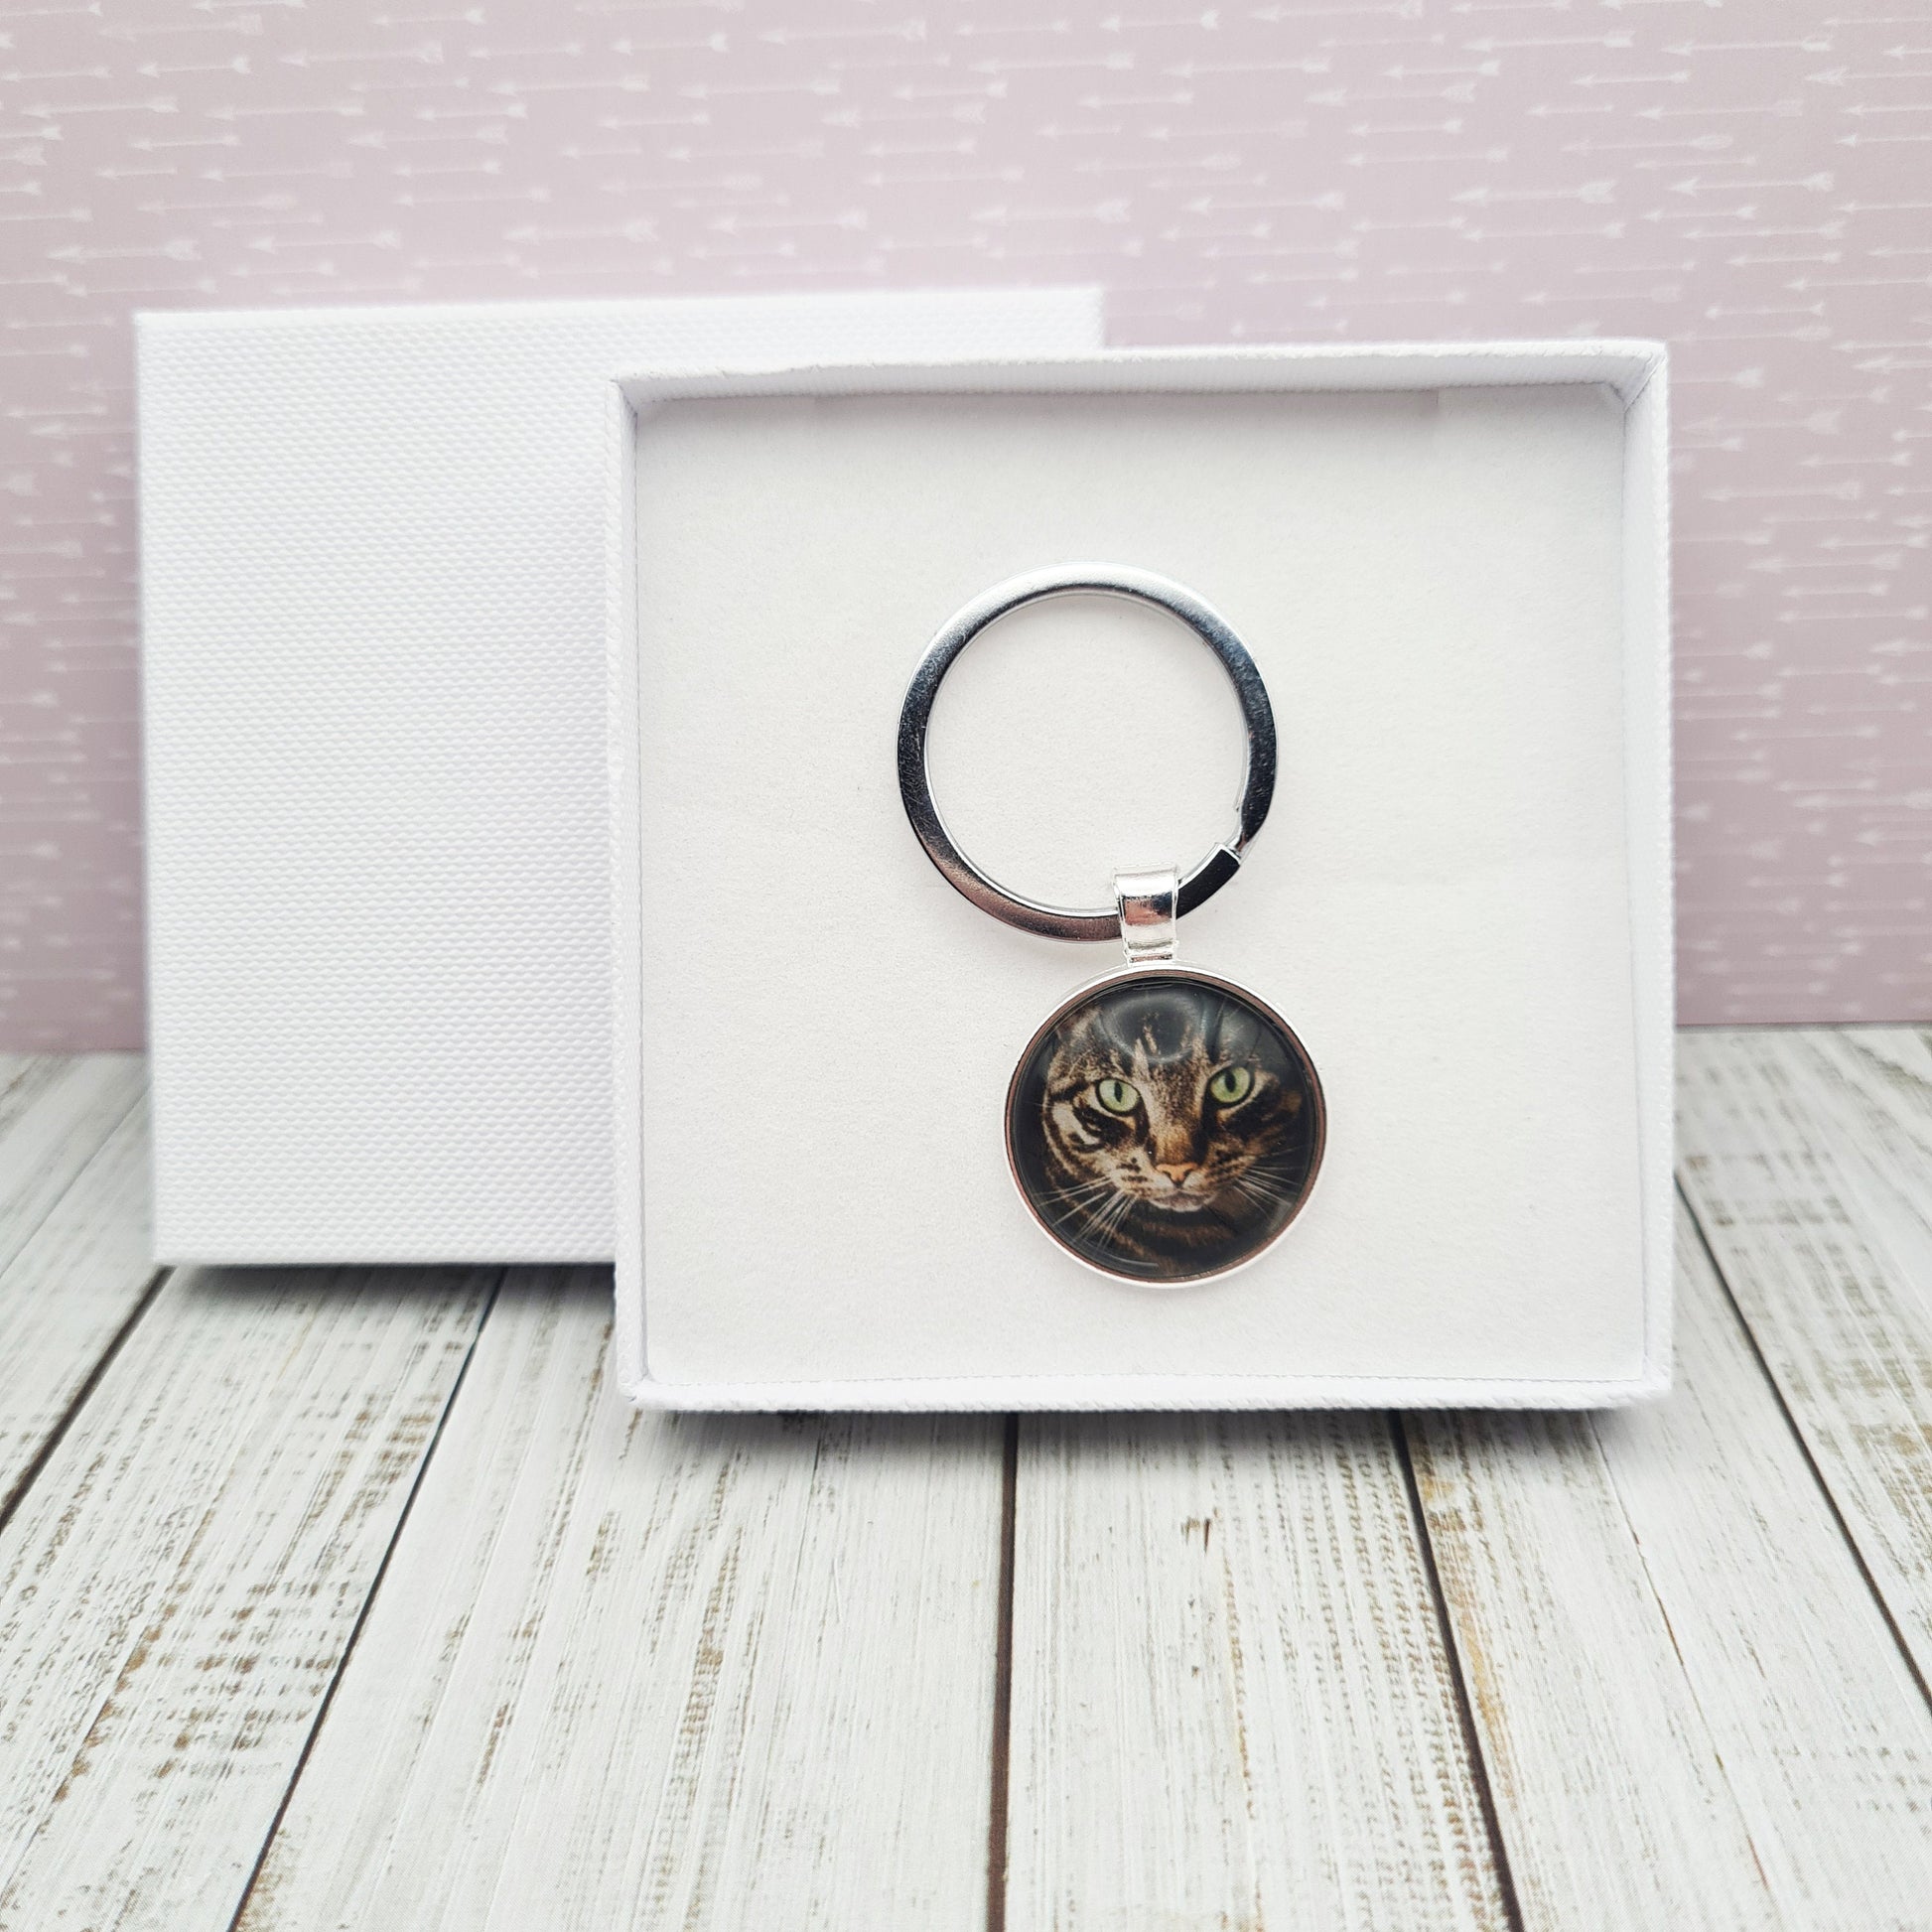 Personalised stainless steel keyring with personalised pet photo set in glass inside a decorative box